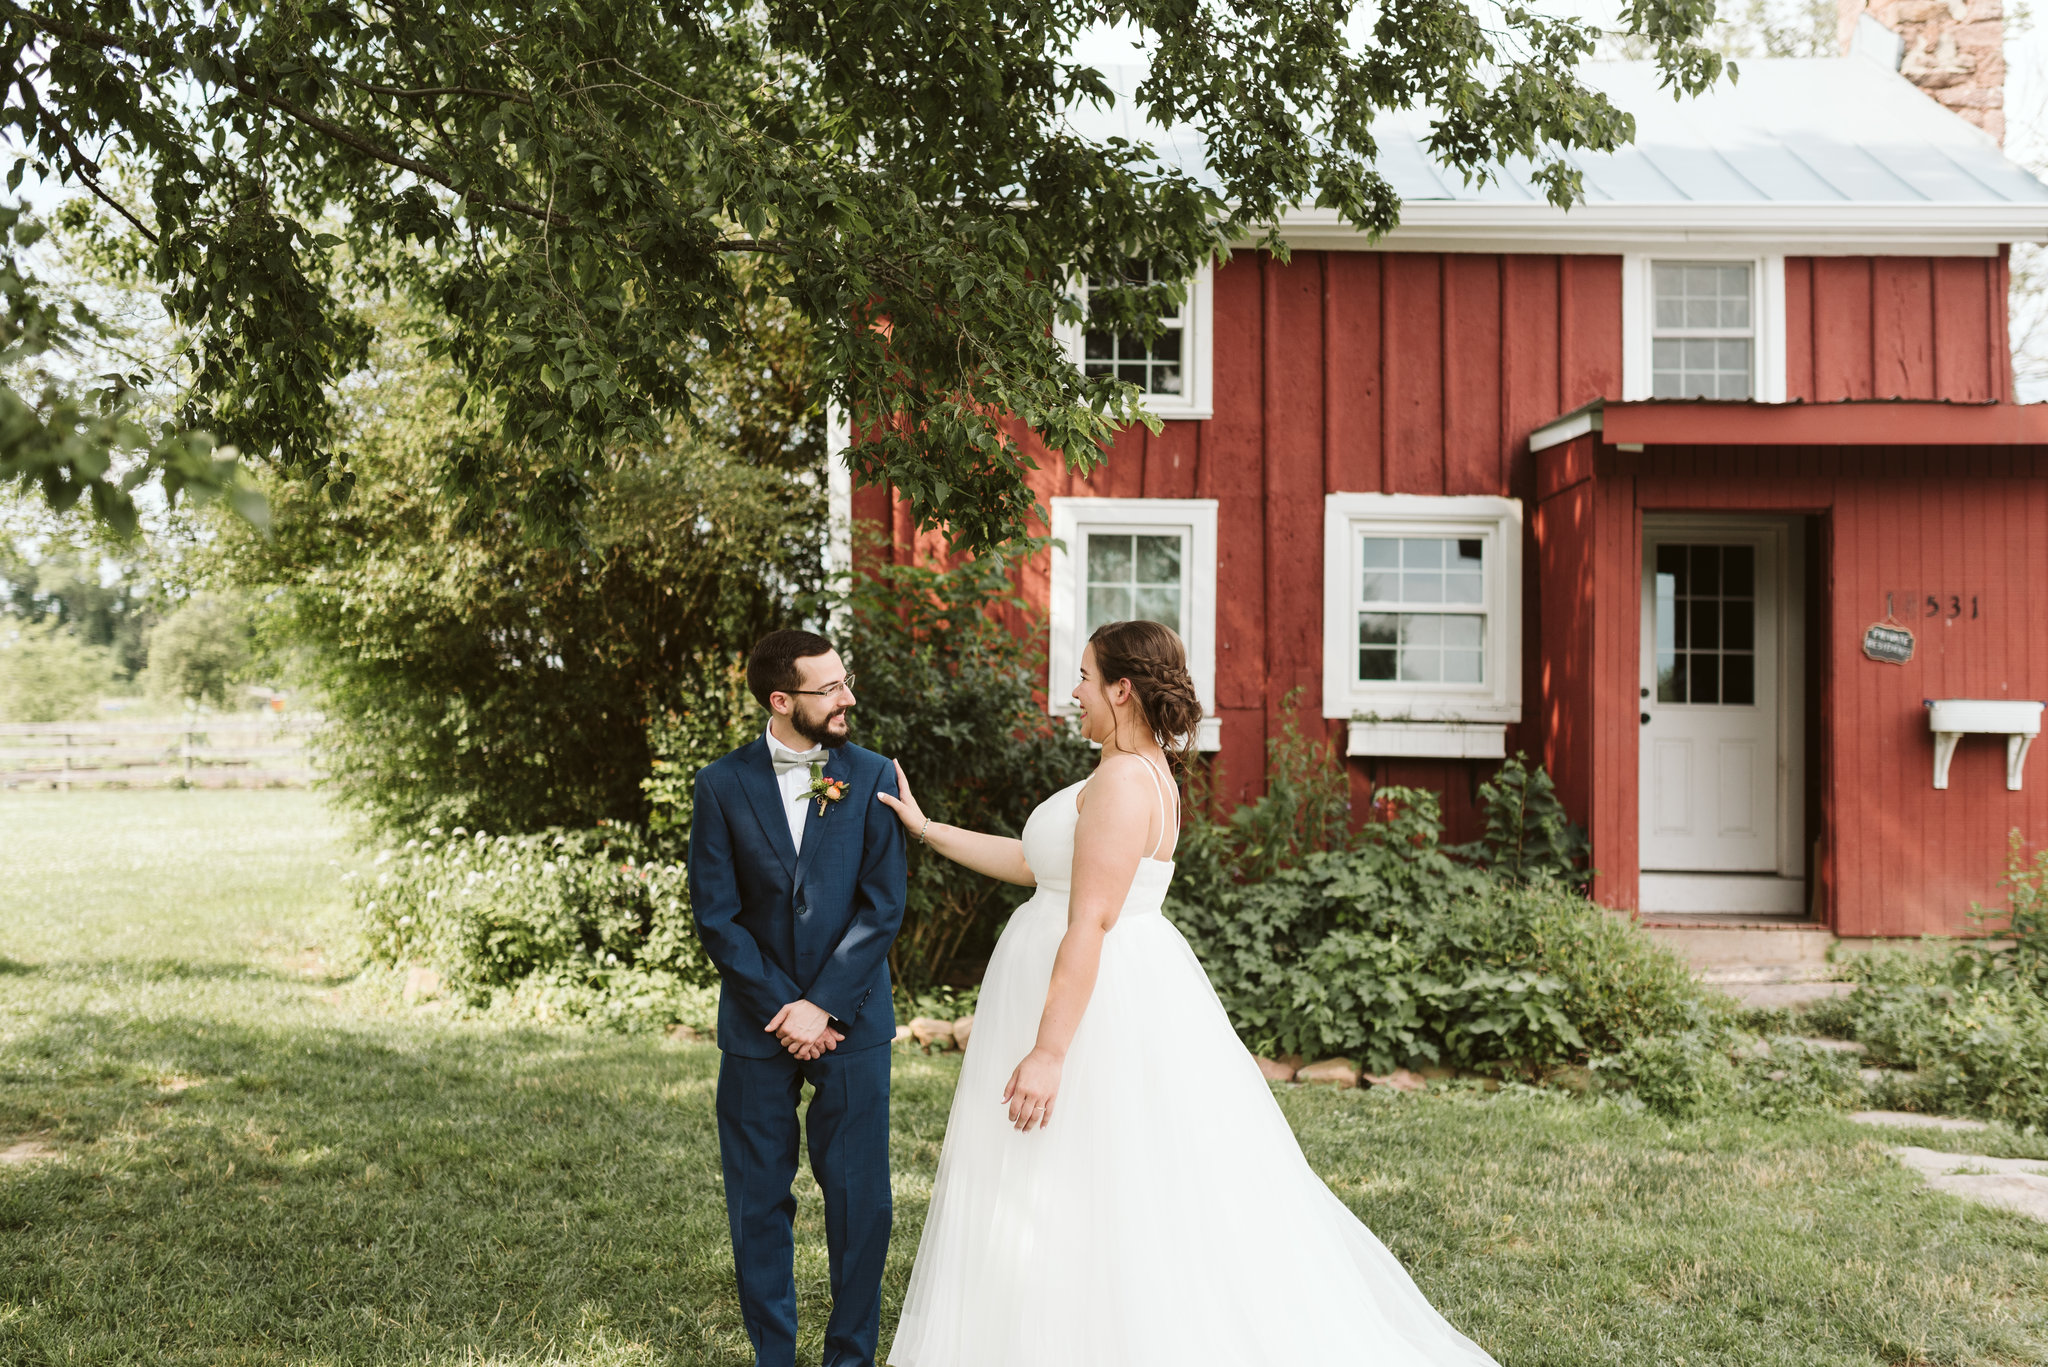 Rocklands Farm, Maryland, Intimate Wedding, Baltimore Wedding Photographer, Sungold Flower Co, Rustic, Romantic, Barn Wedding, The First Look, Bride and Groom Laughing Together Outside